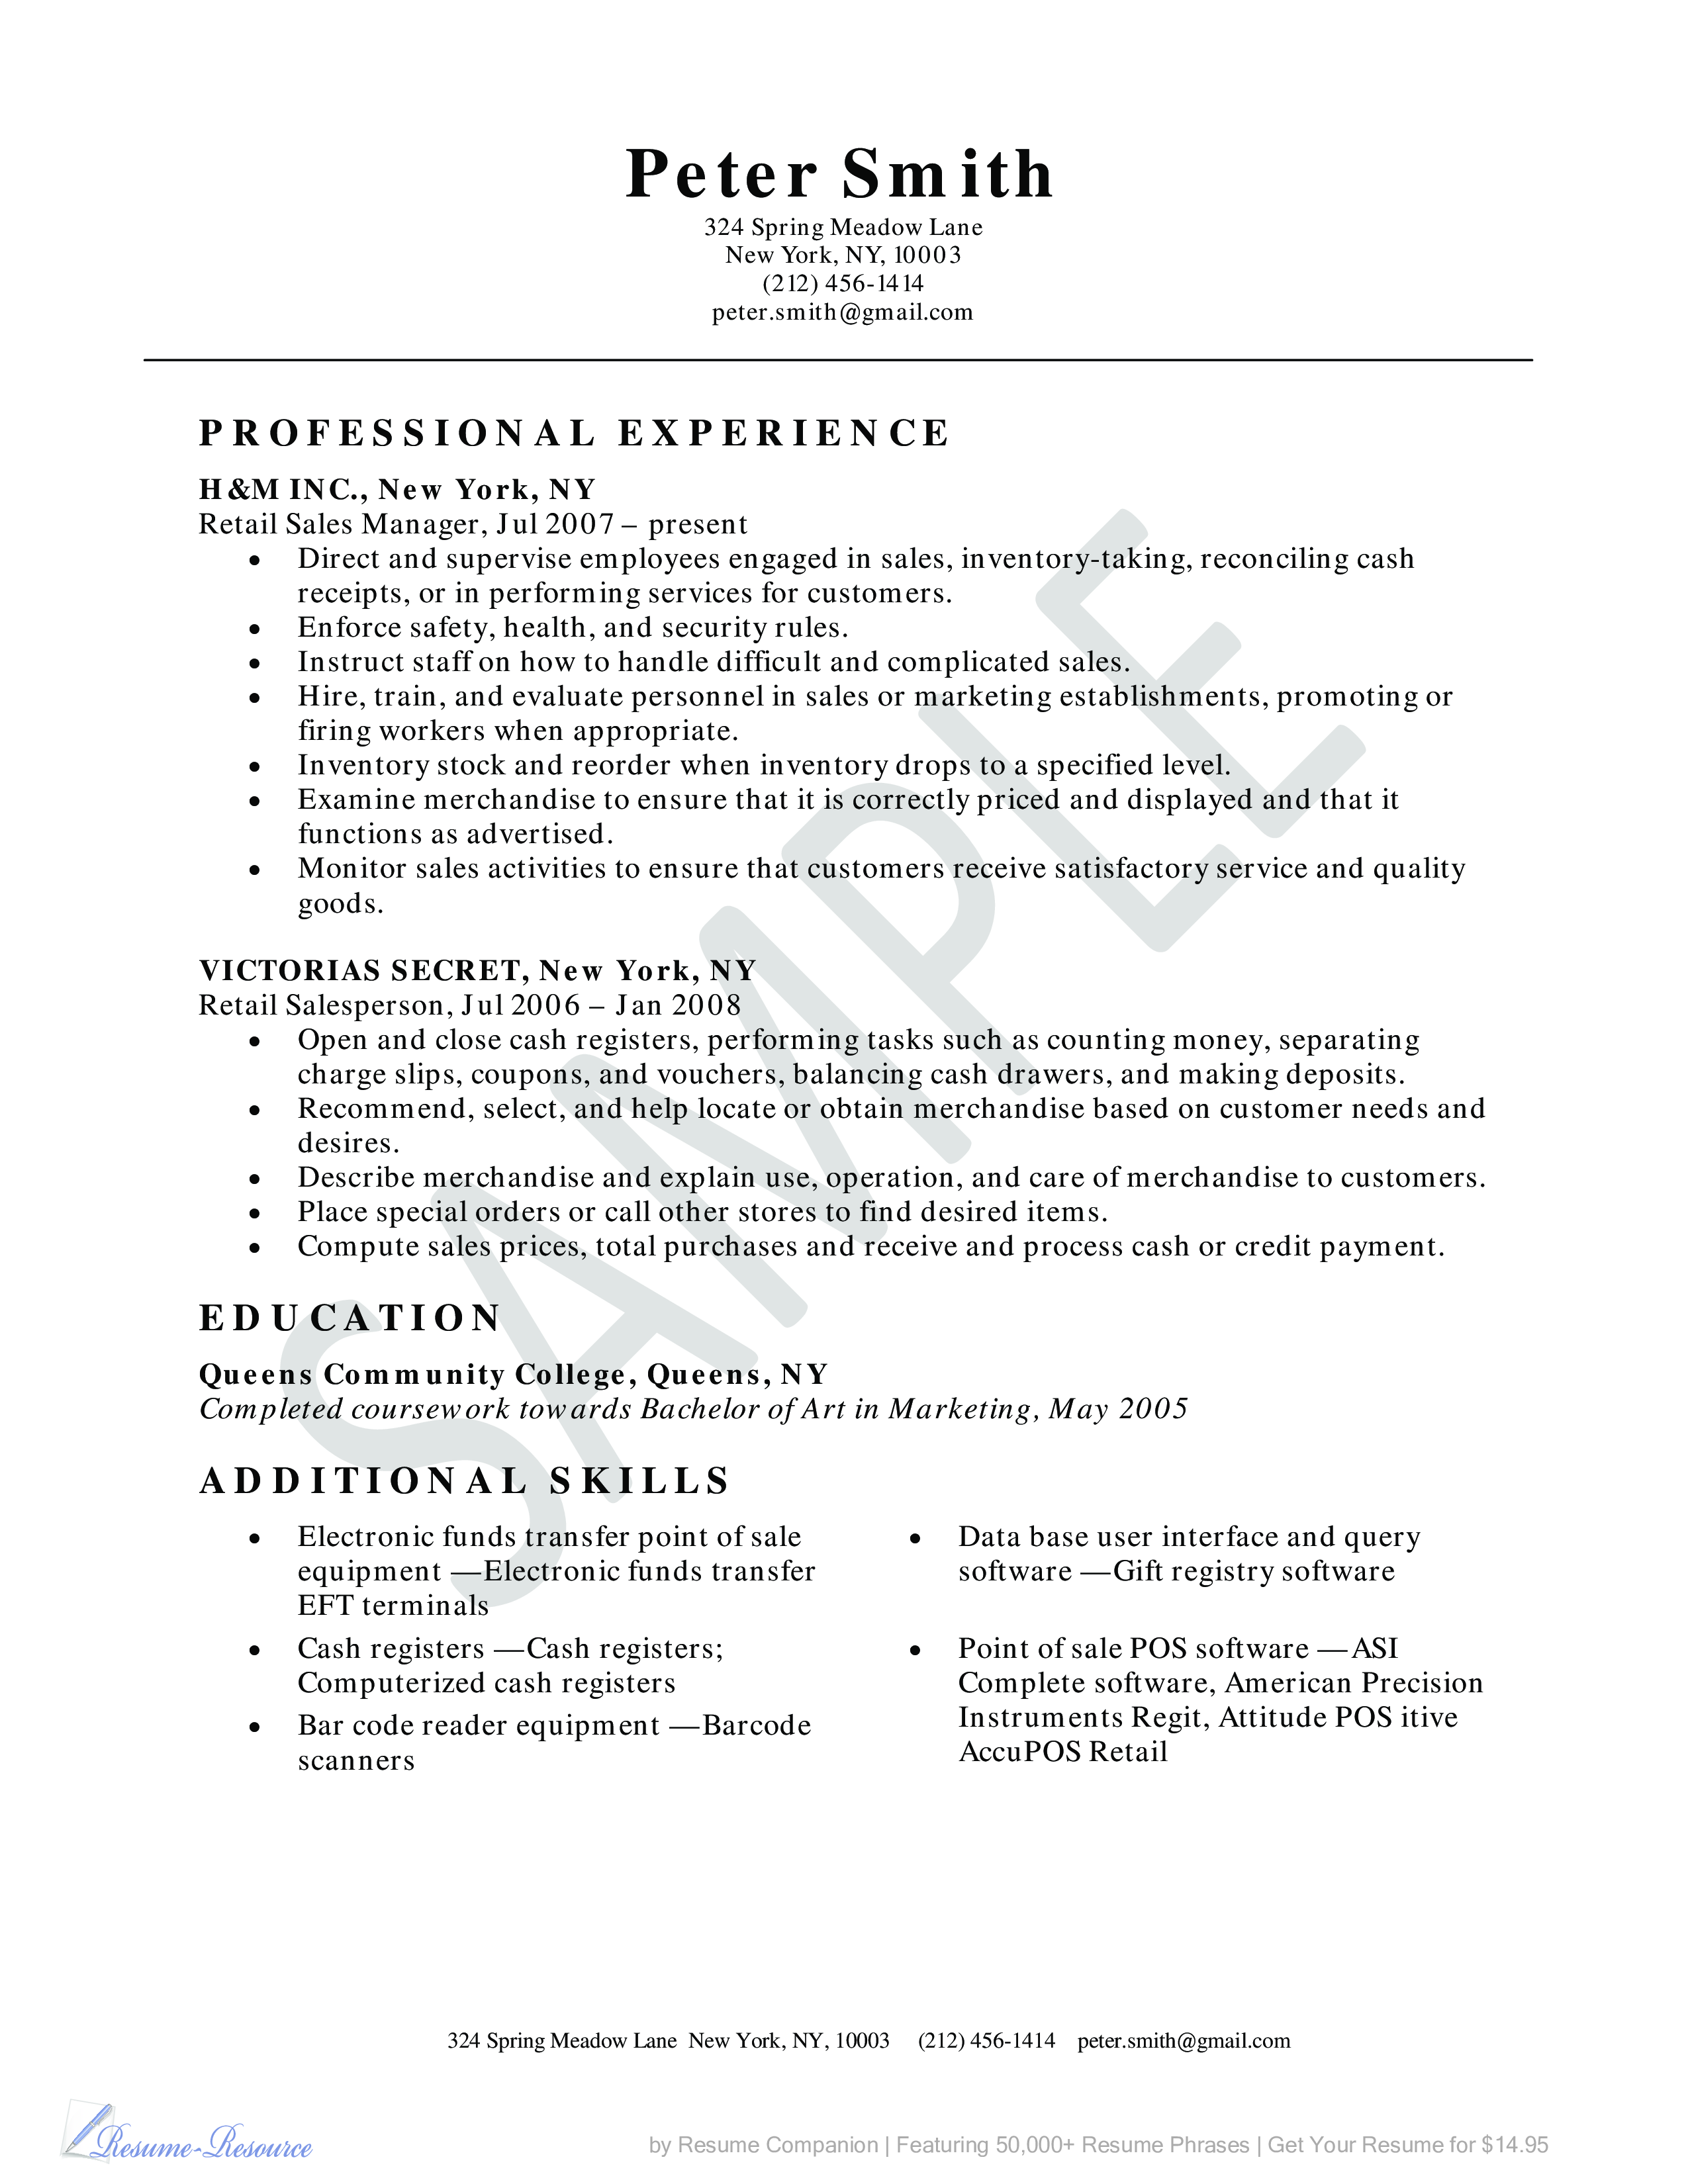 resume template for retail sales